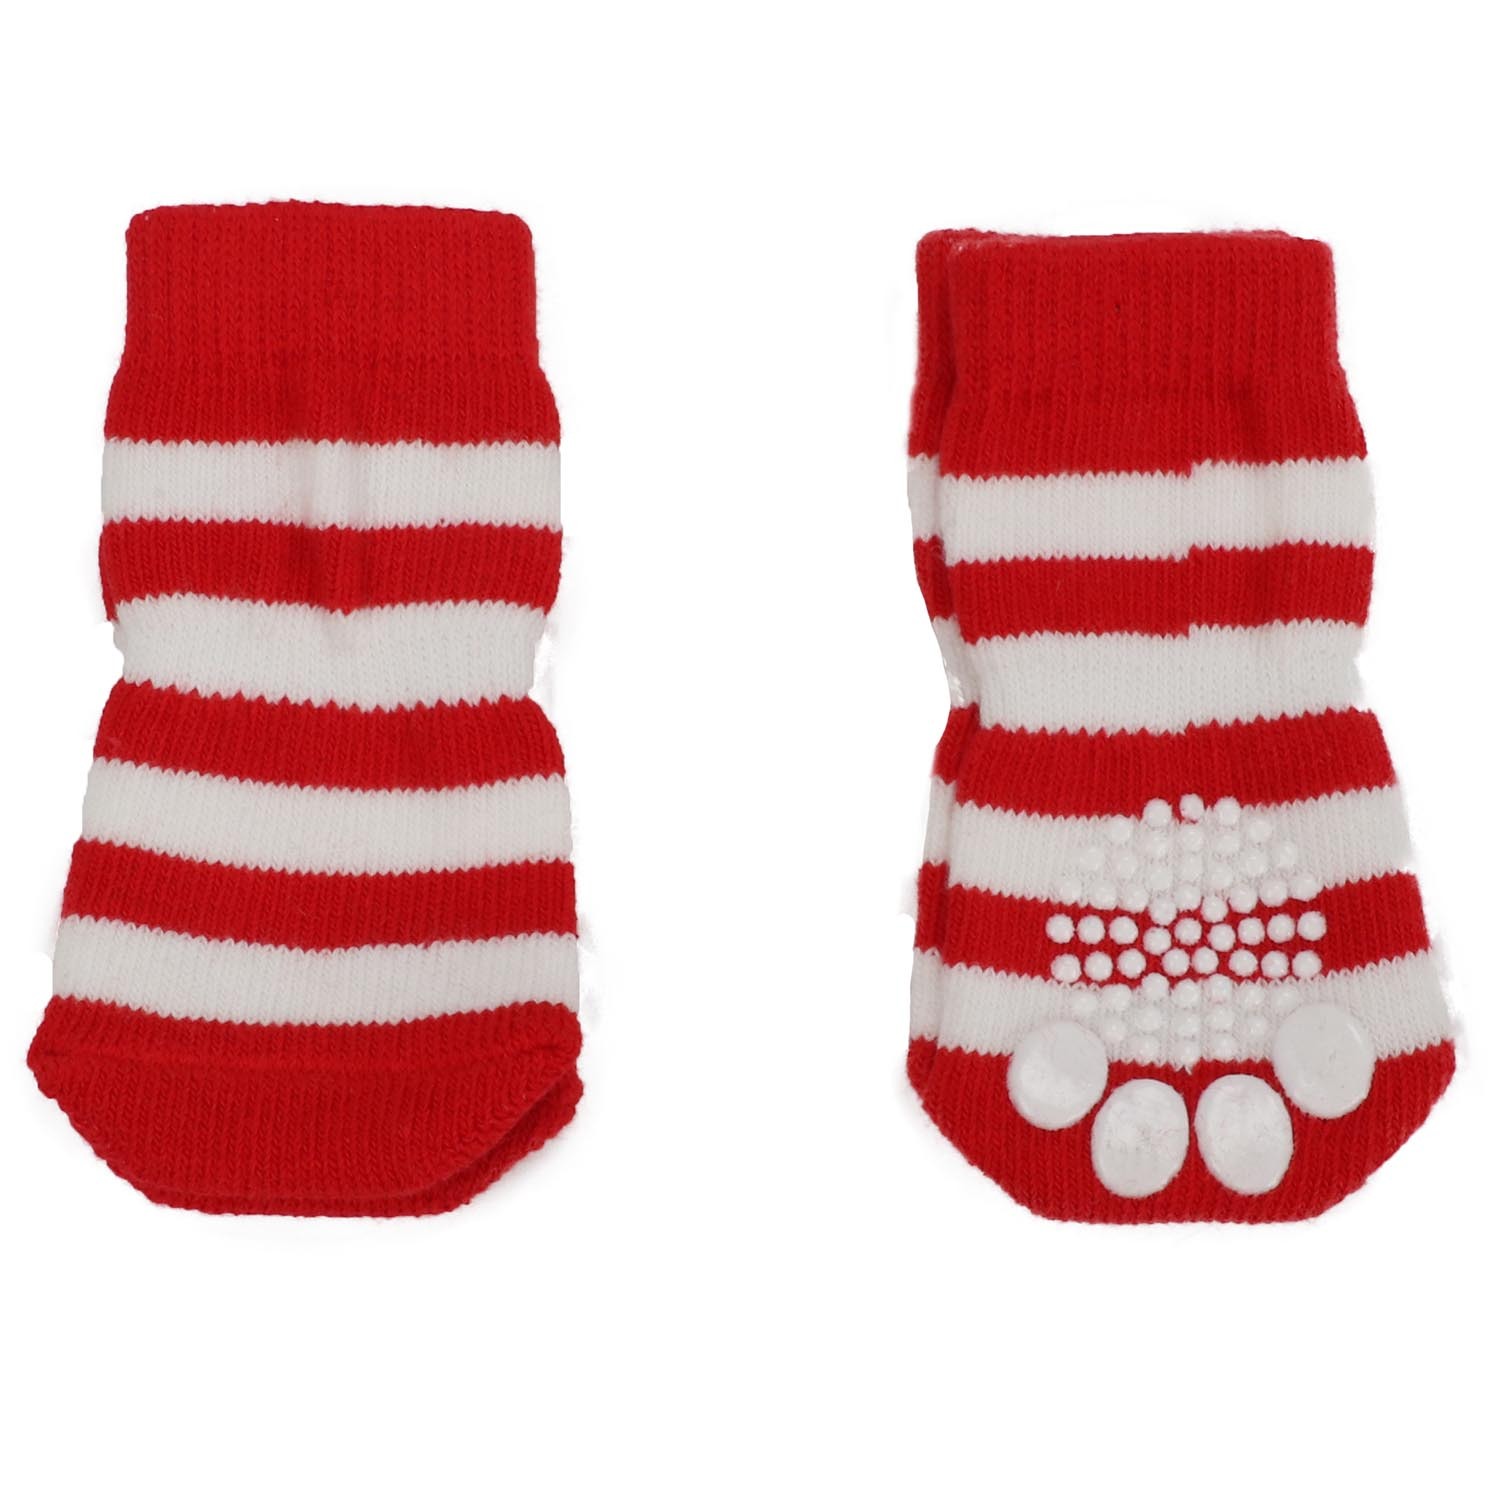 Candy Cane Pet Socks - Red Image 1